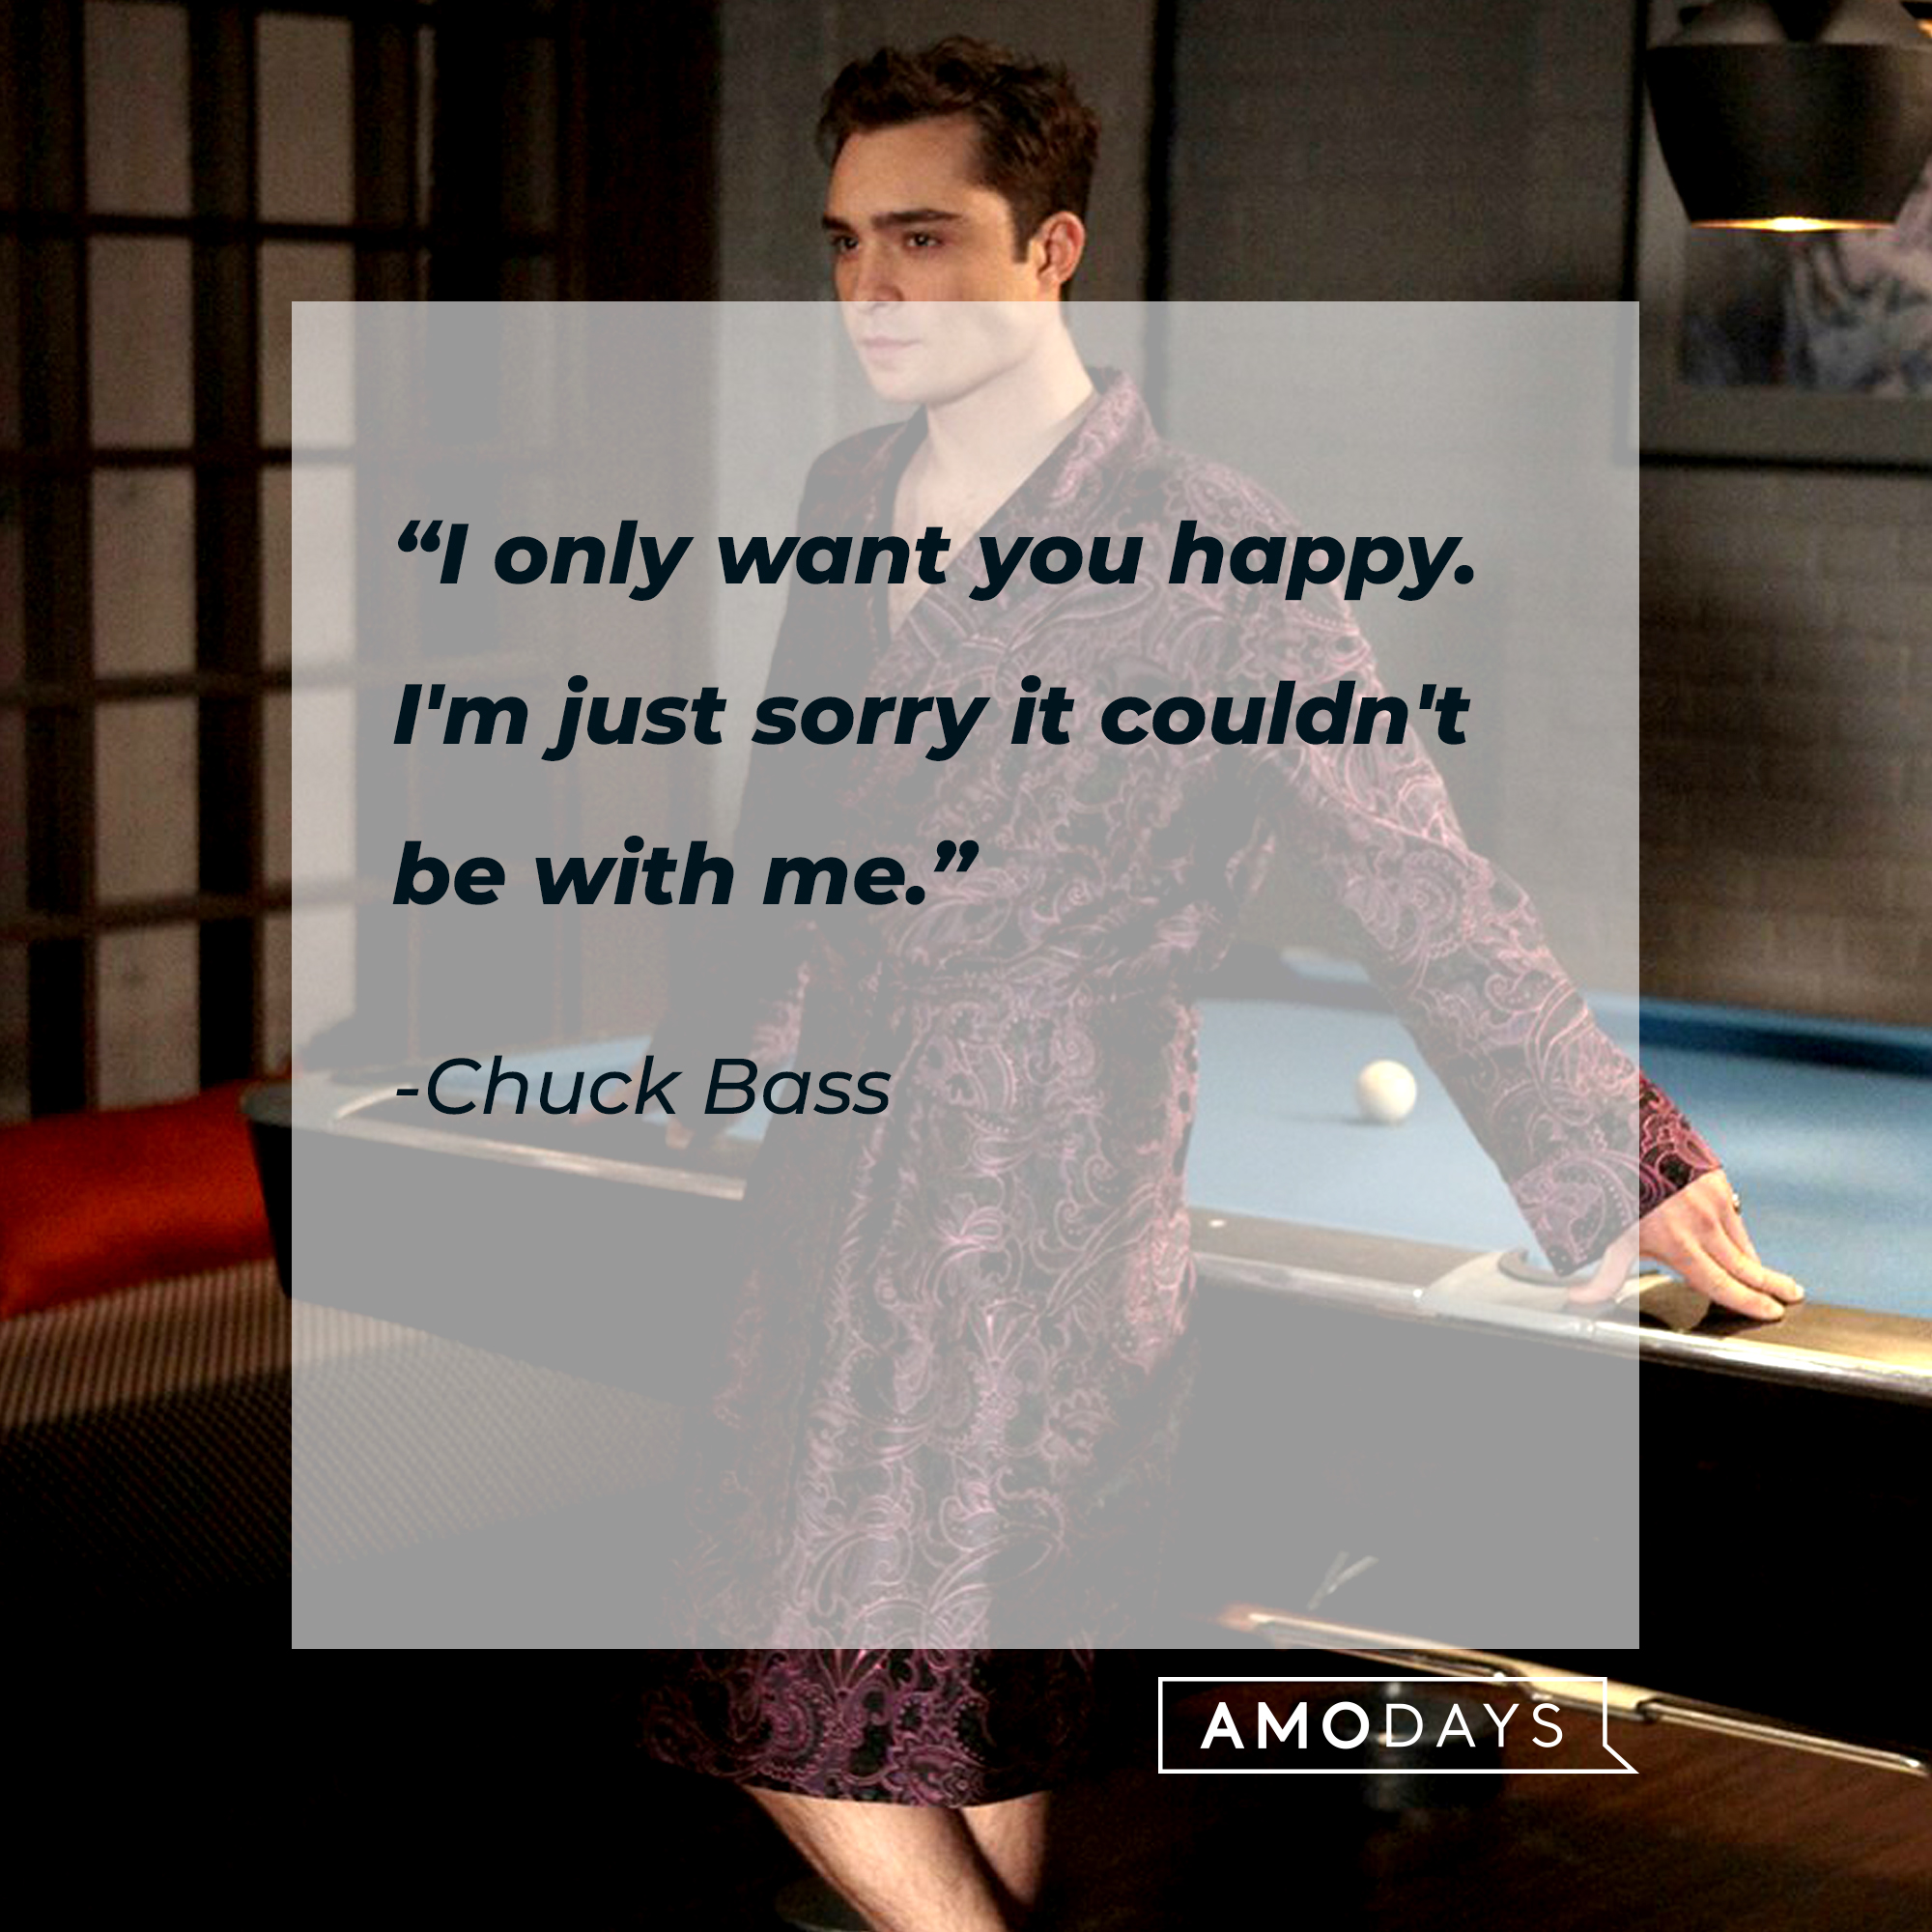 Chuck Bass from "Gossip Girl" with his quote: “I only want you happy. I'm just sorry it couldn't be with me.” | Source: Facebook.com/GossipGirl